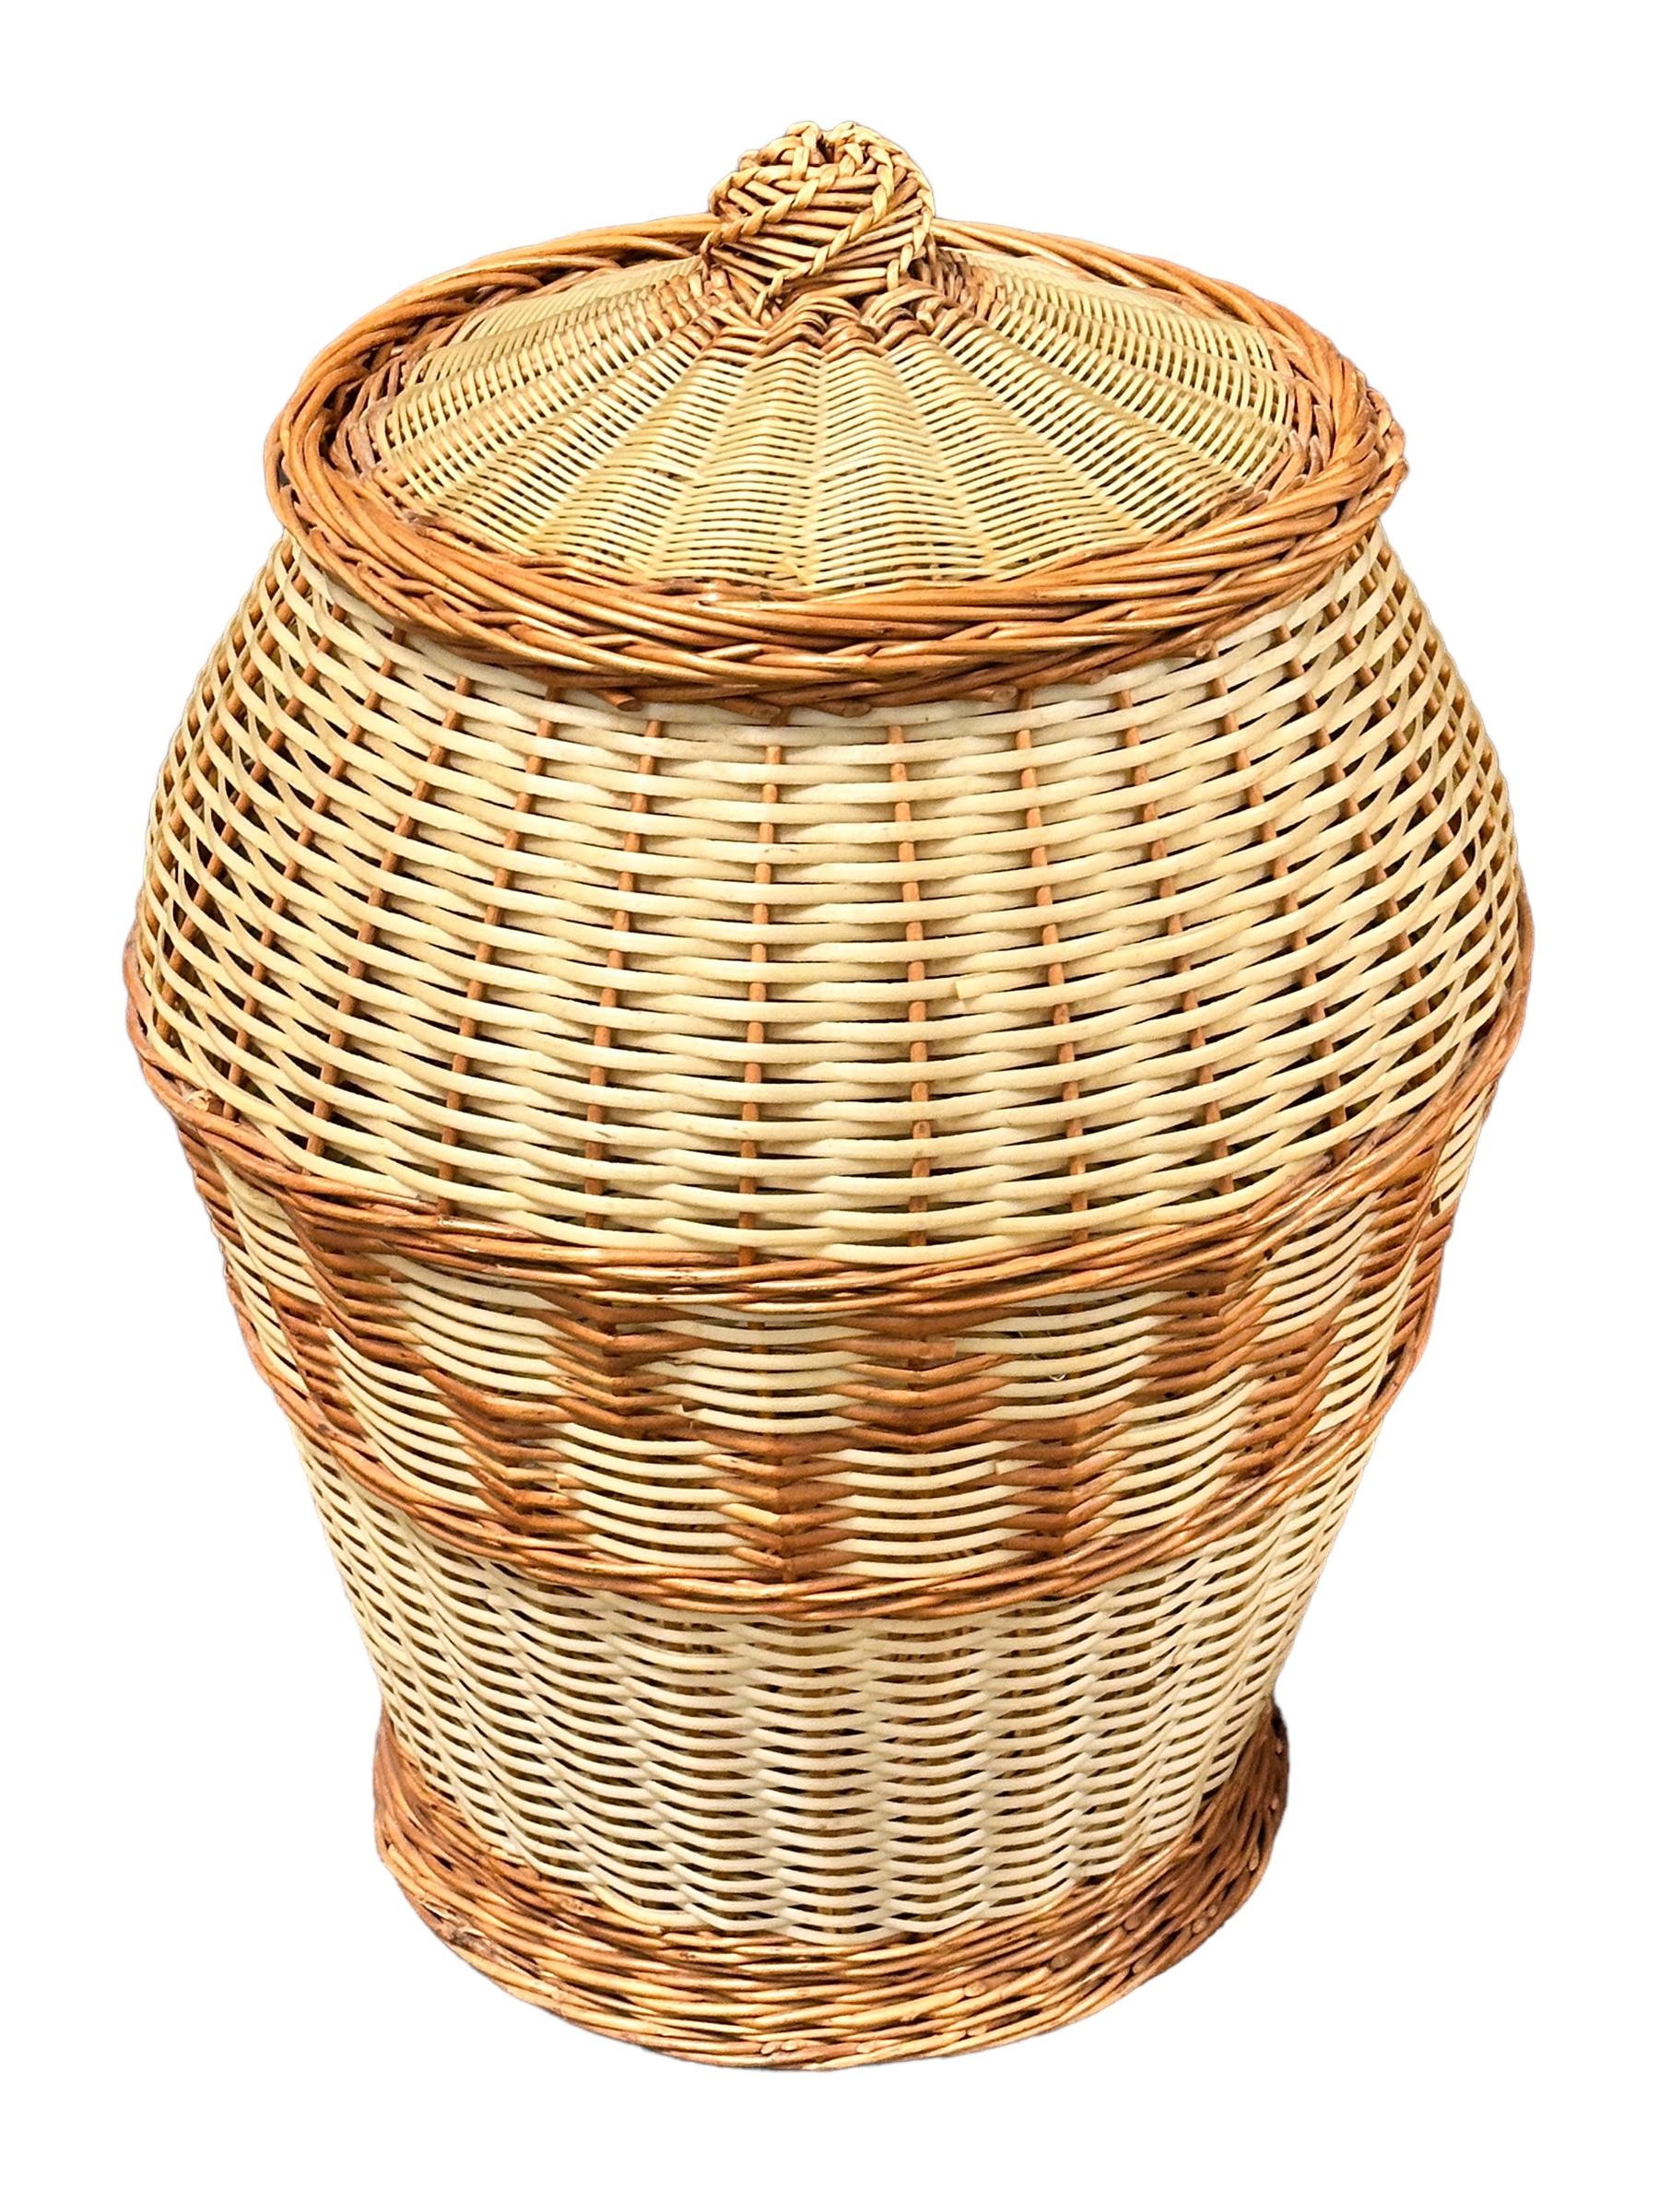 Offered is an absolutely stunning large 1970s vintage wicker and plastic laundry basket hamper with lid and wicker handles. Overall very good vintage condition with light ware consistent with age and use. A nice addition to any room. You can also